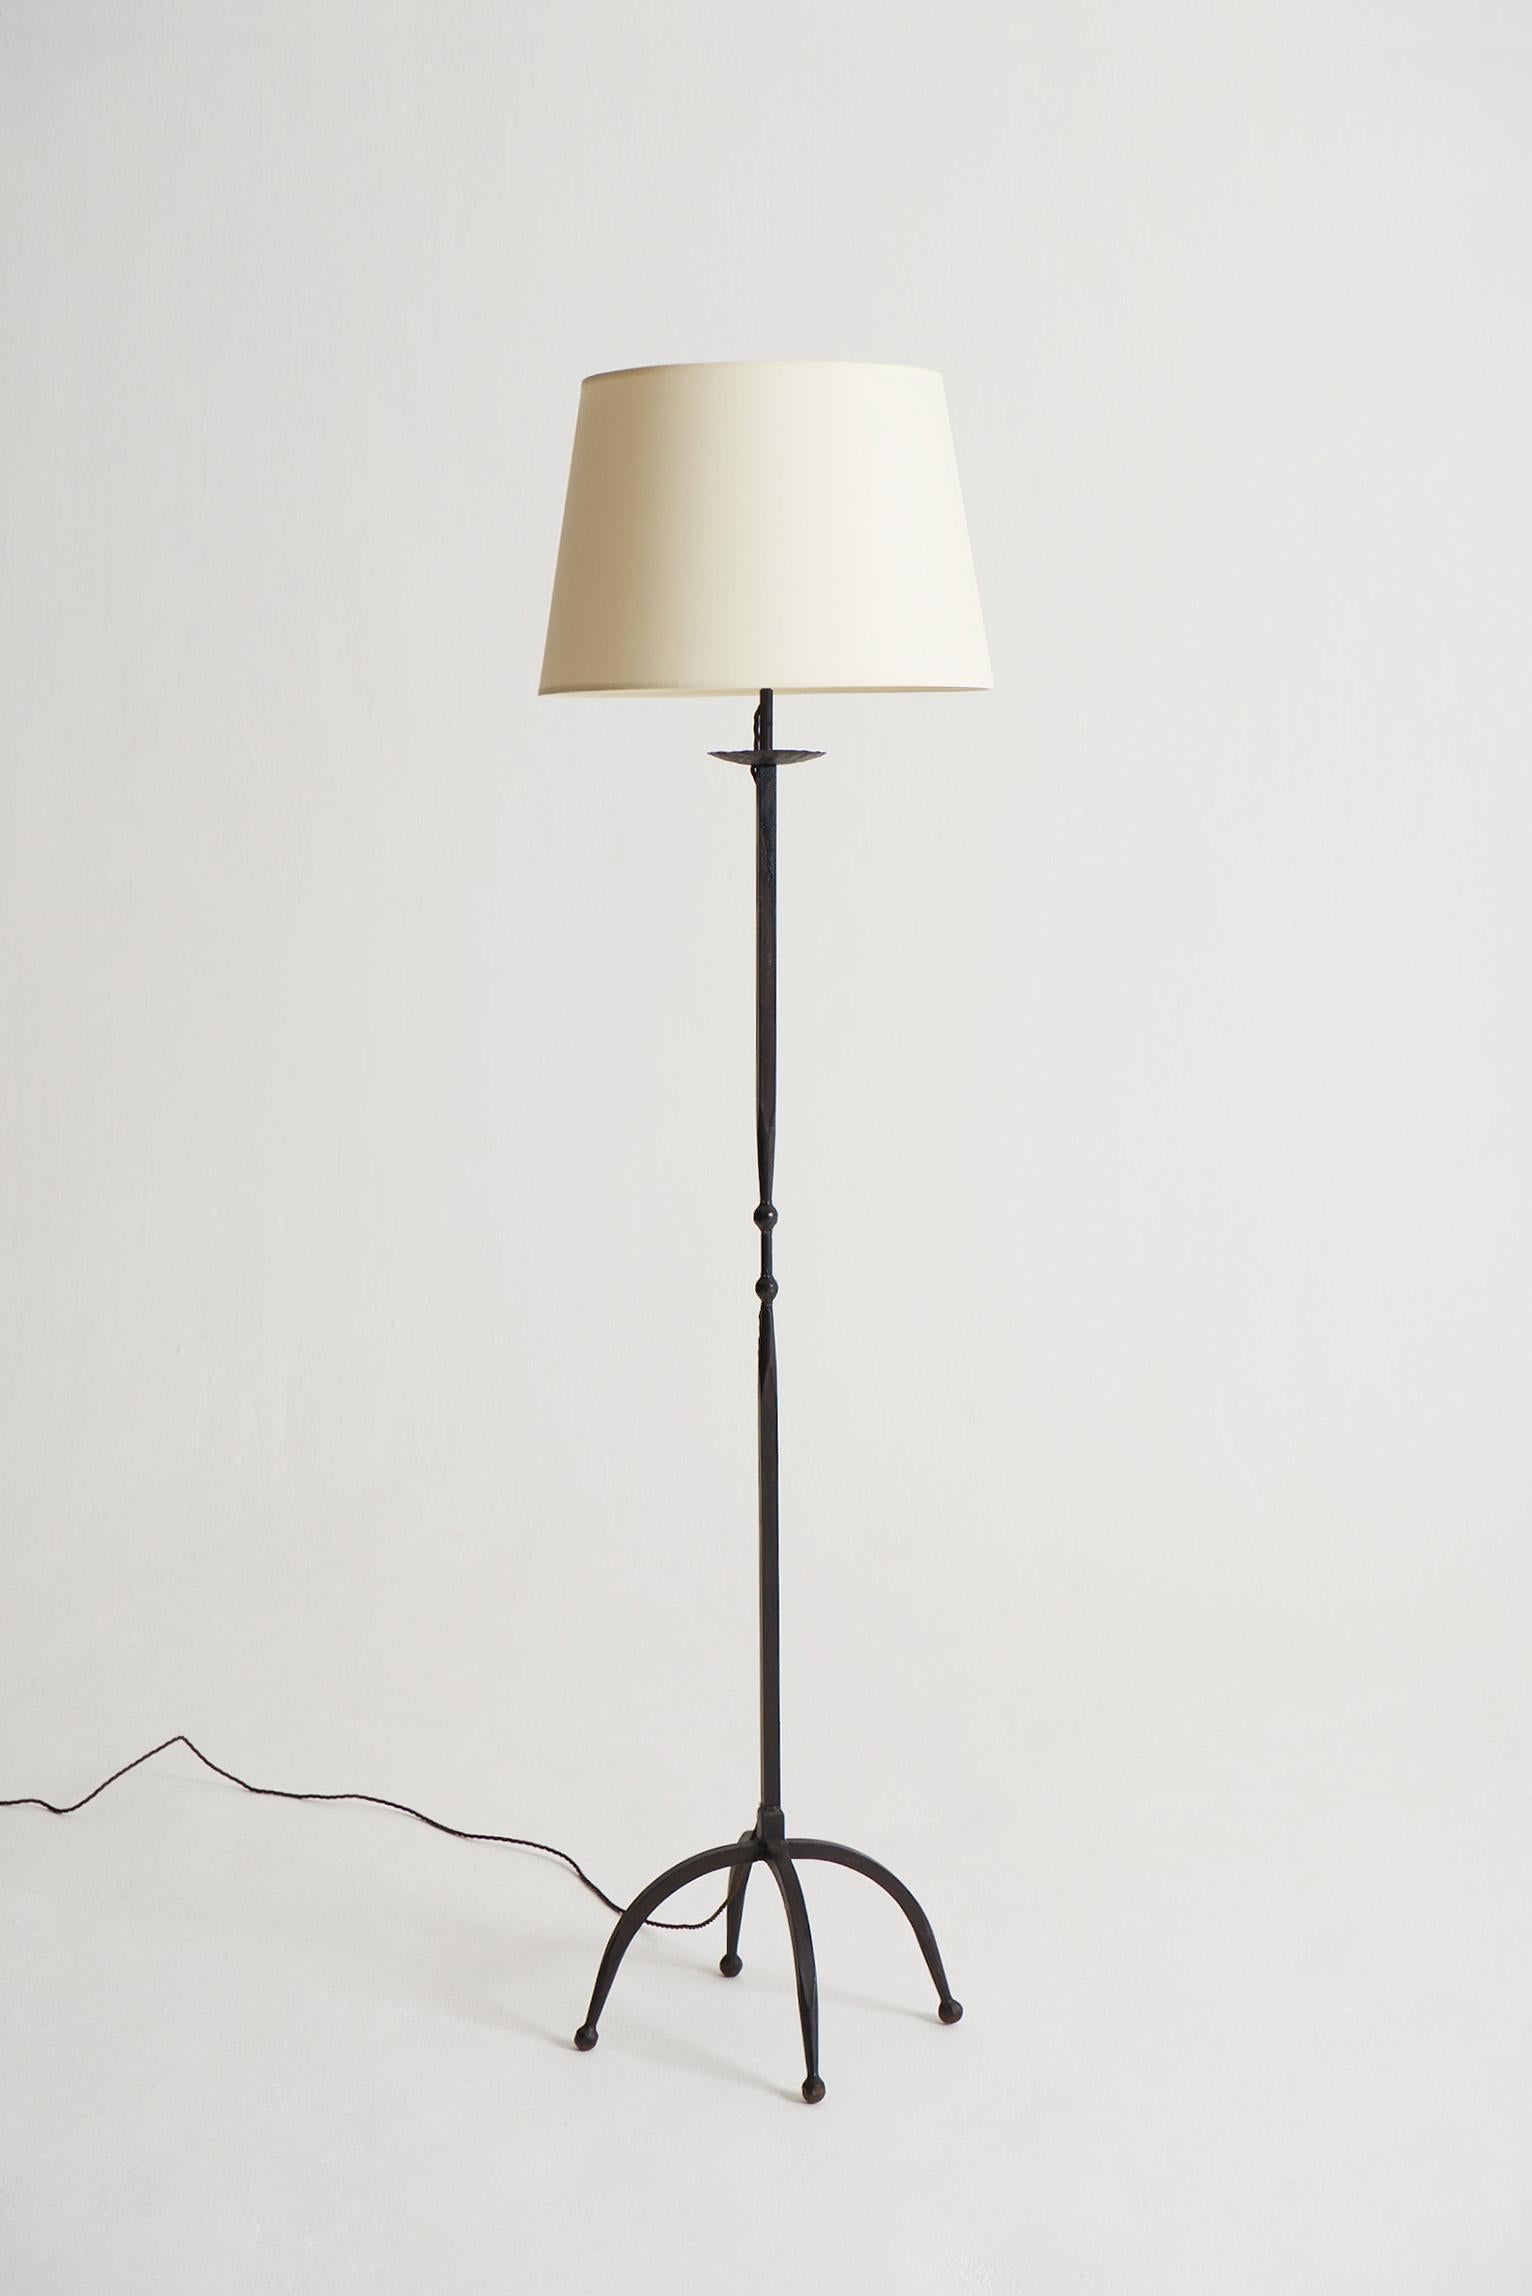 A hand wrought iron floor lamp.
France, Circa 1940.
With the shade: 175 cm tall by 46 cm diameter.
Lamp base only: 147 cm high by 42 cm diameter.